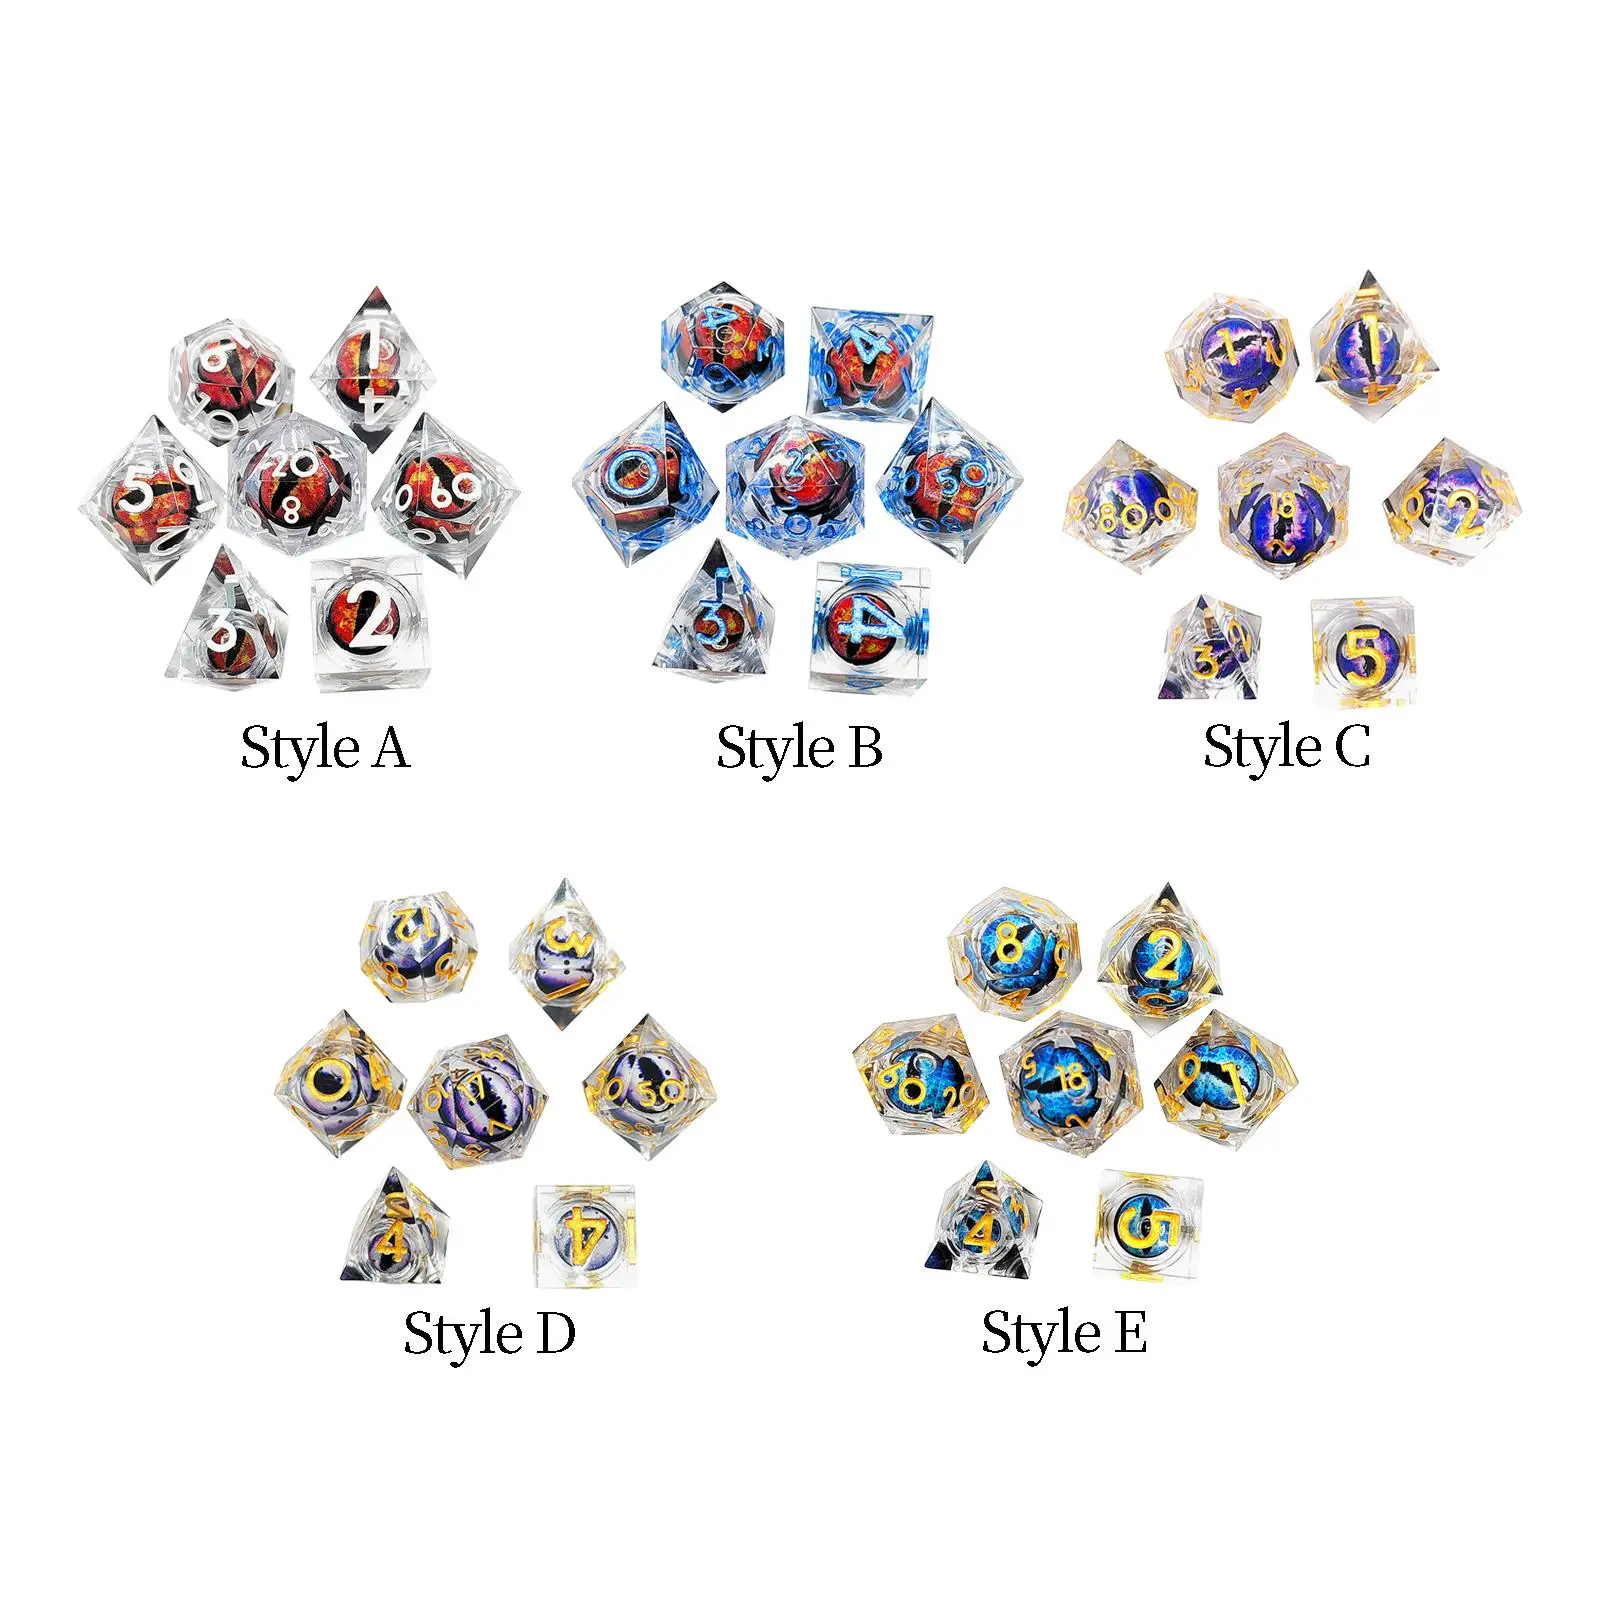 Resin Polyhedral Eye Dice 7Pcs Set Accessories for Teaching Projects